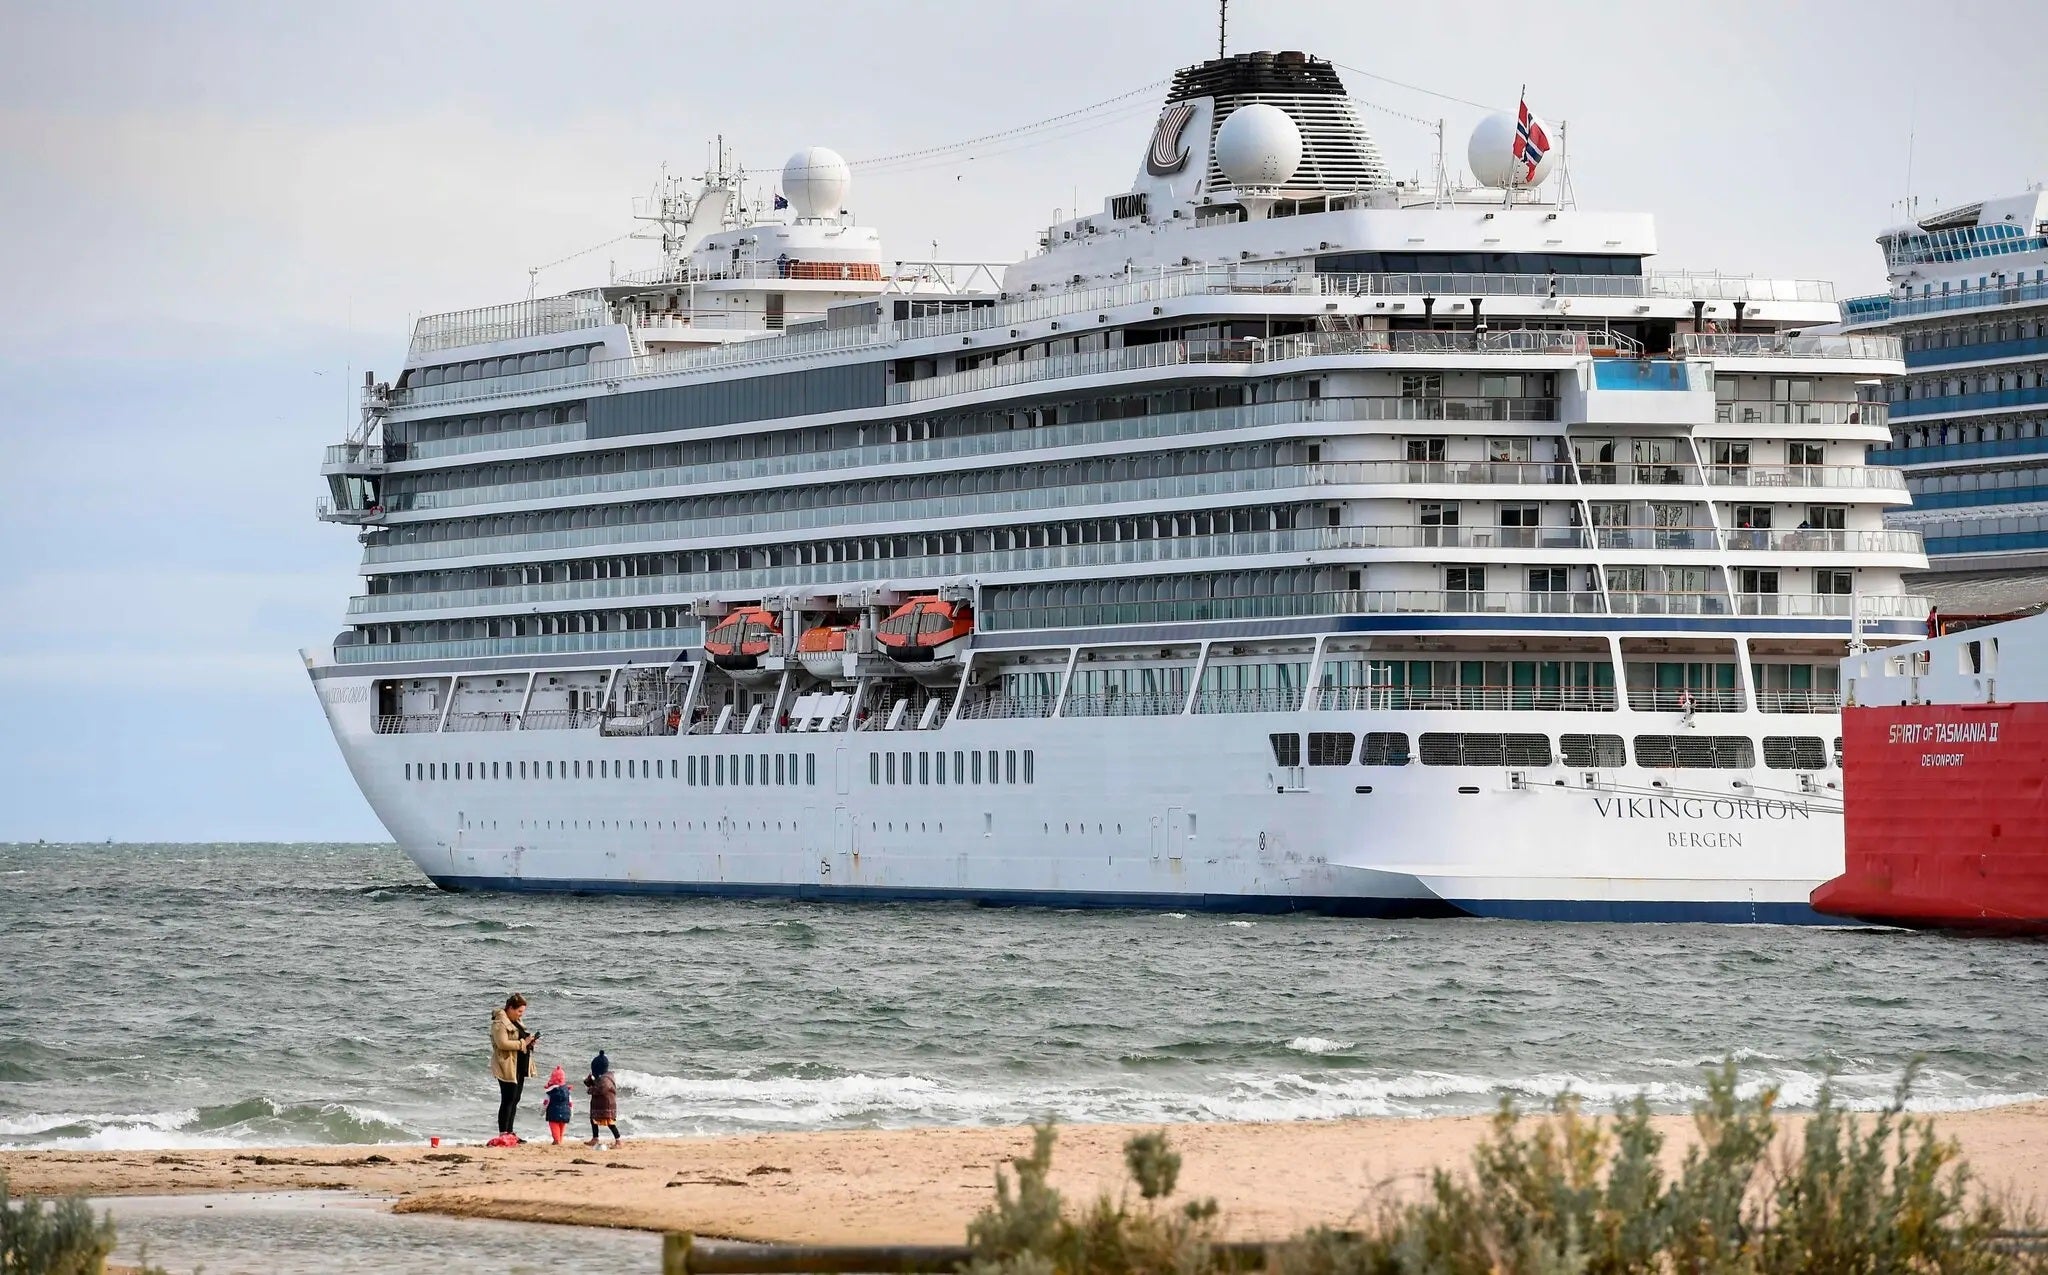 Passengers on a holiday cruise have been stranded off the coast of Australia due to potentially harmful growth on the ship’s hull